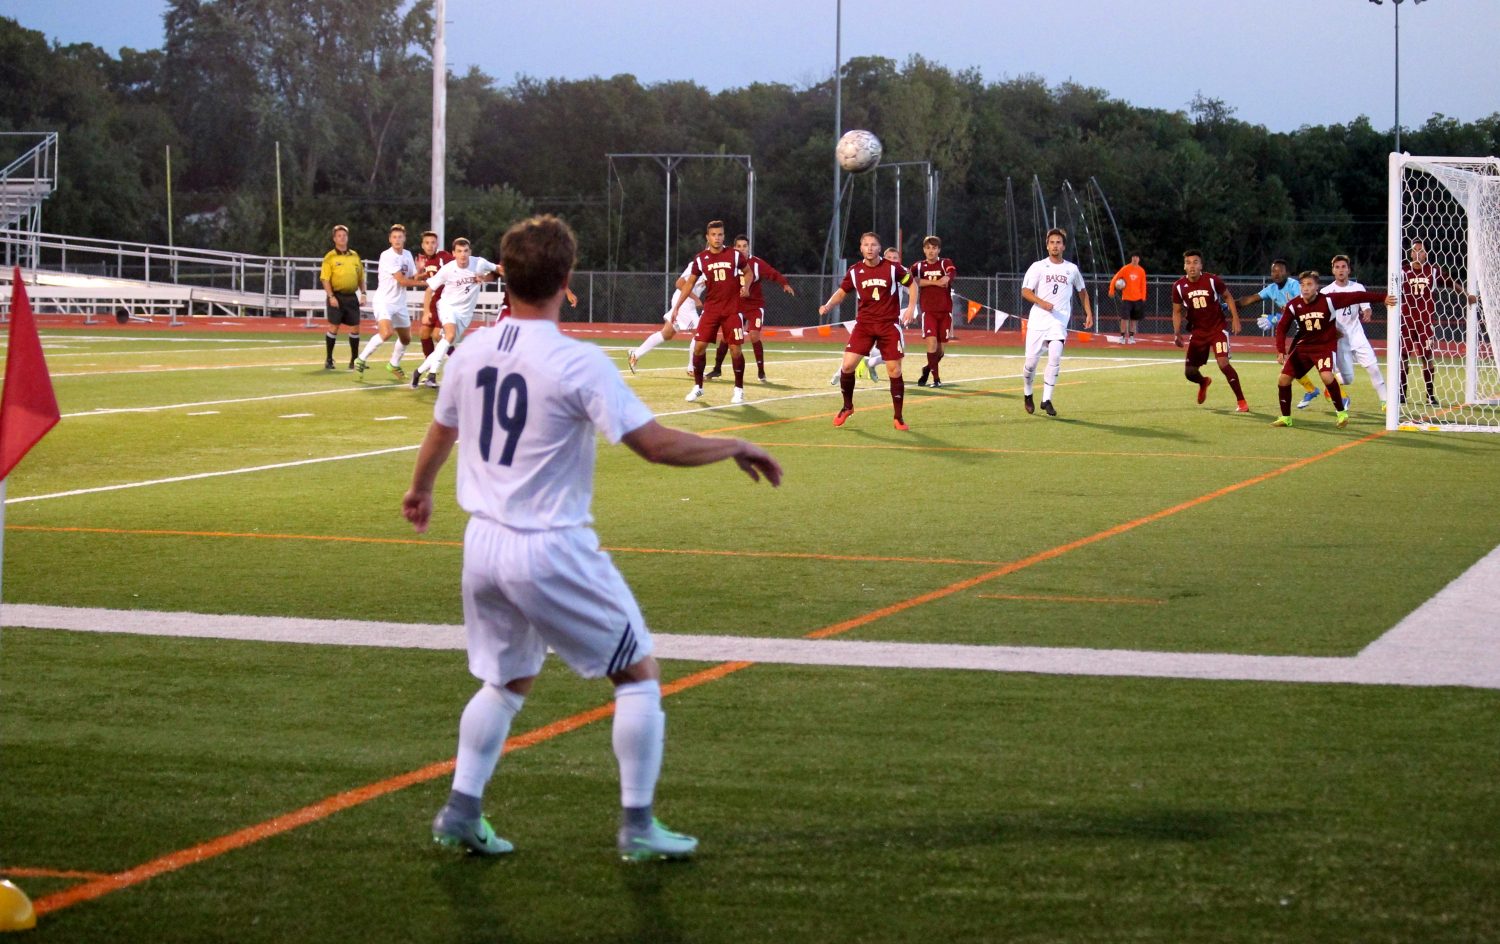 Freshman defender Payton Brown sends in a corner kick against Park University in the first half of the game on Sept. 10 at Liston Stadium.